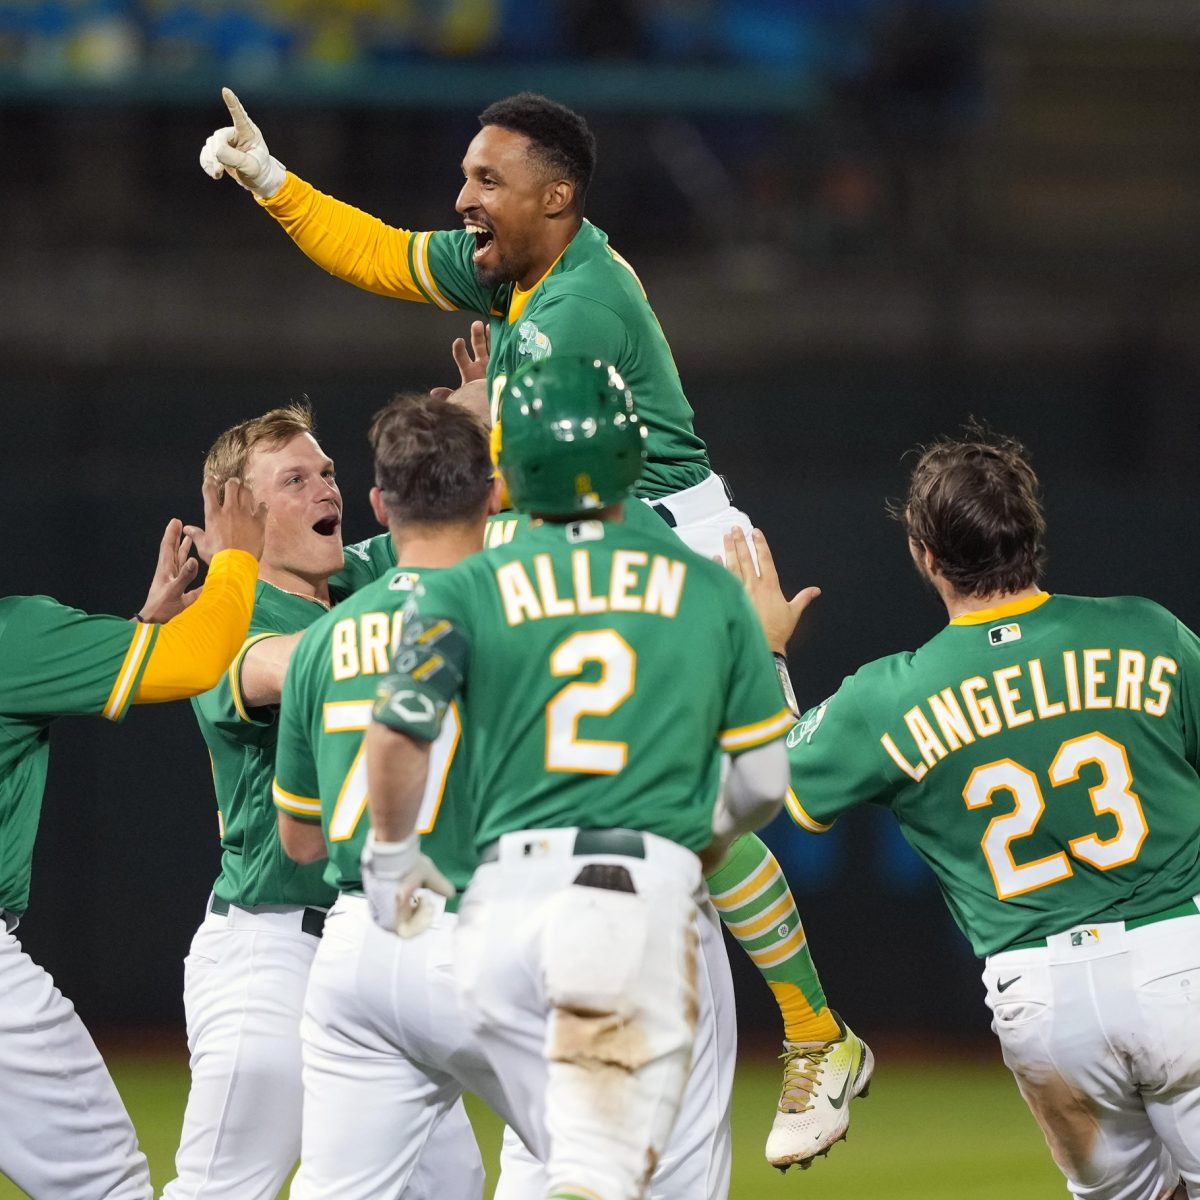 Seattle Mariners vs. Oakland Athletics Prediction, Preview, and Odds - 5-3-2023